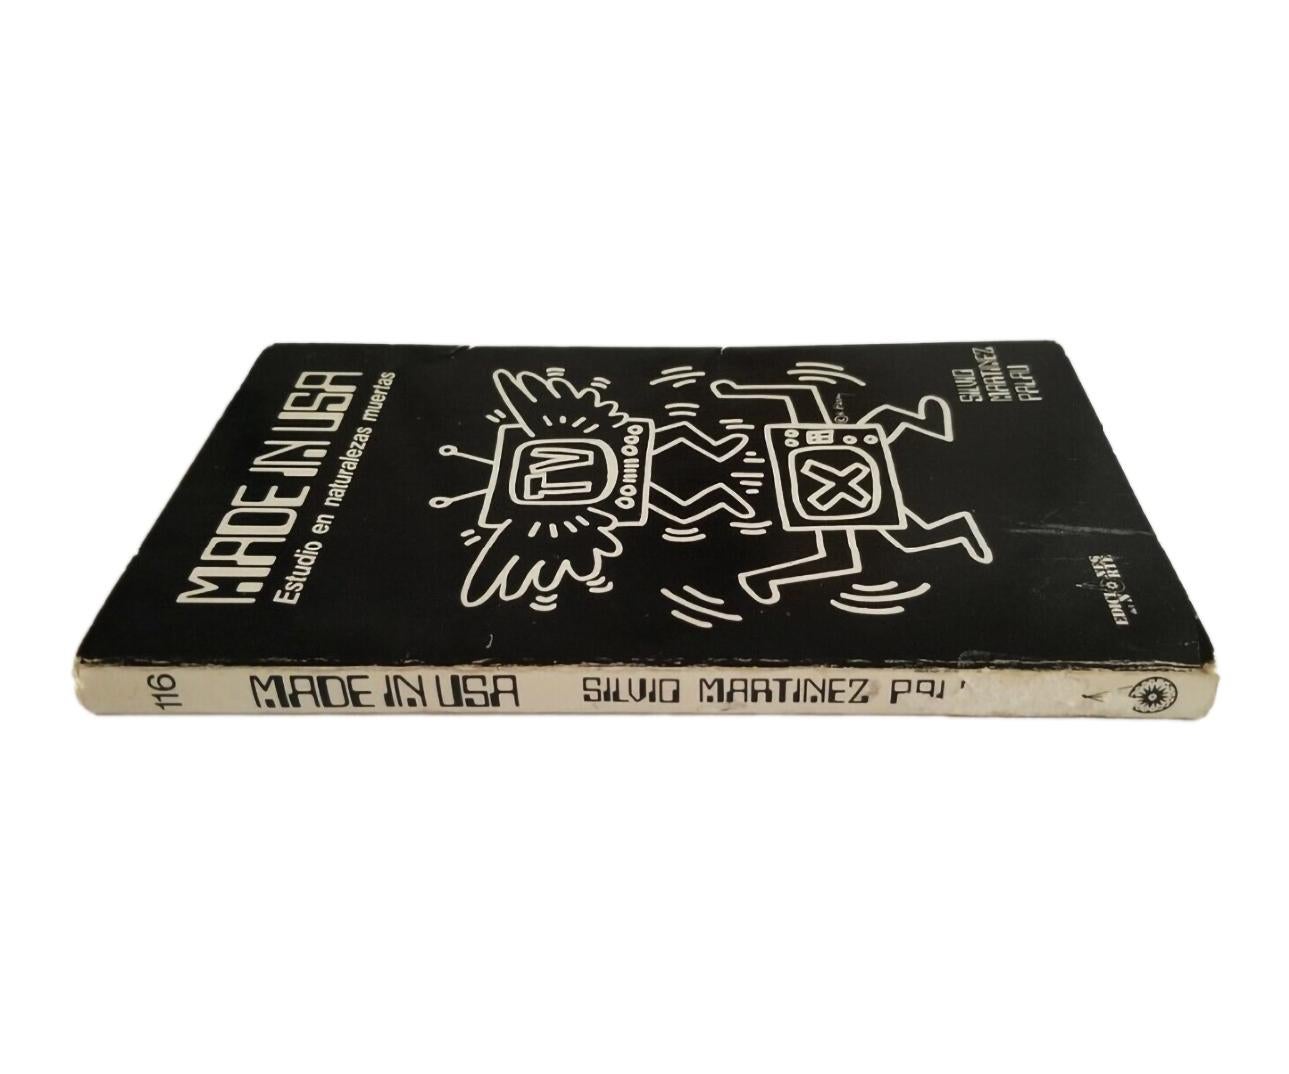 Keith Haring illustration art 1986 (Keith Haring 1986) For Sale 1